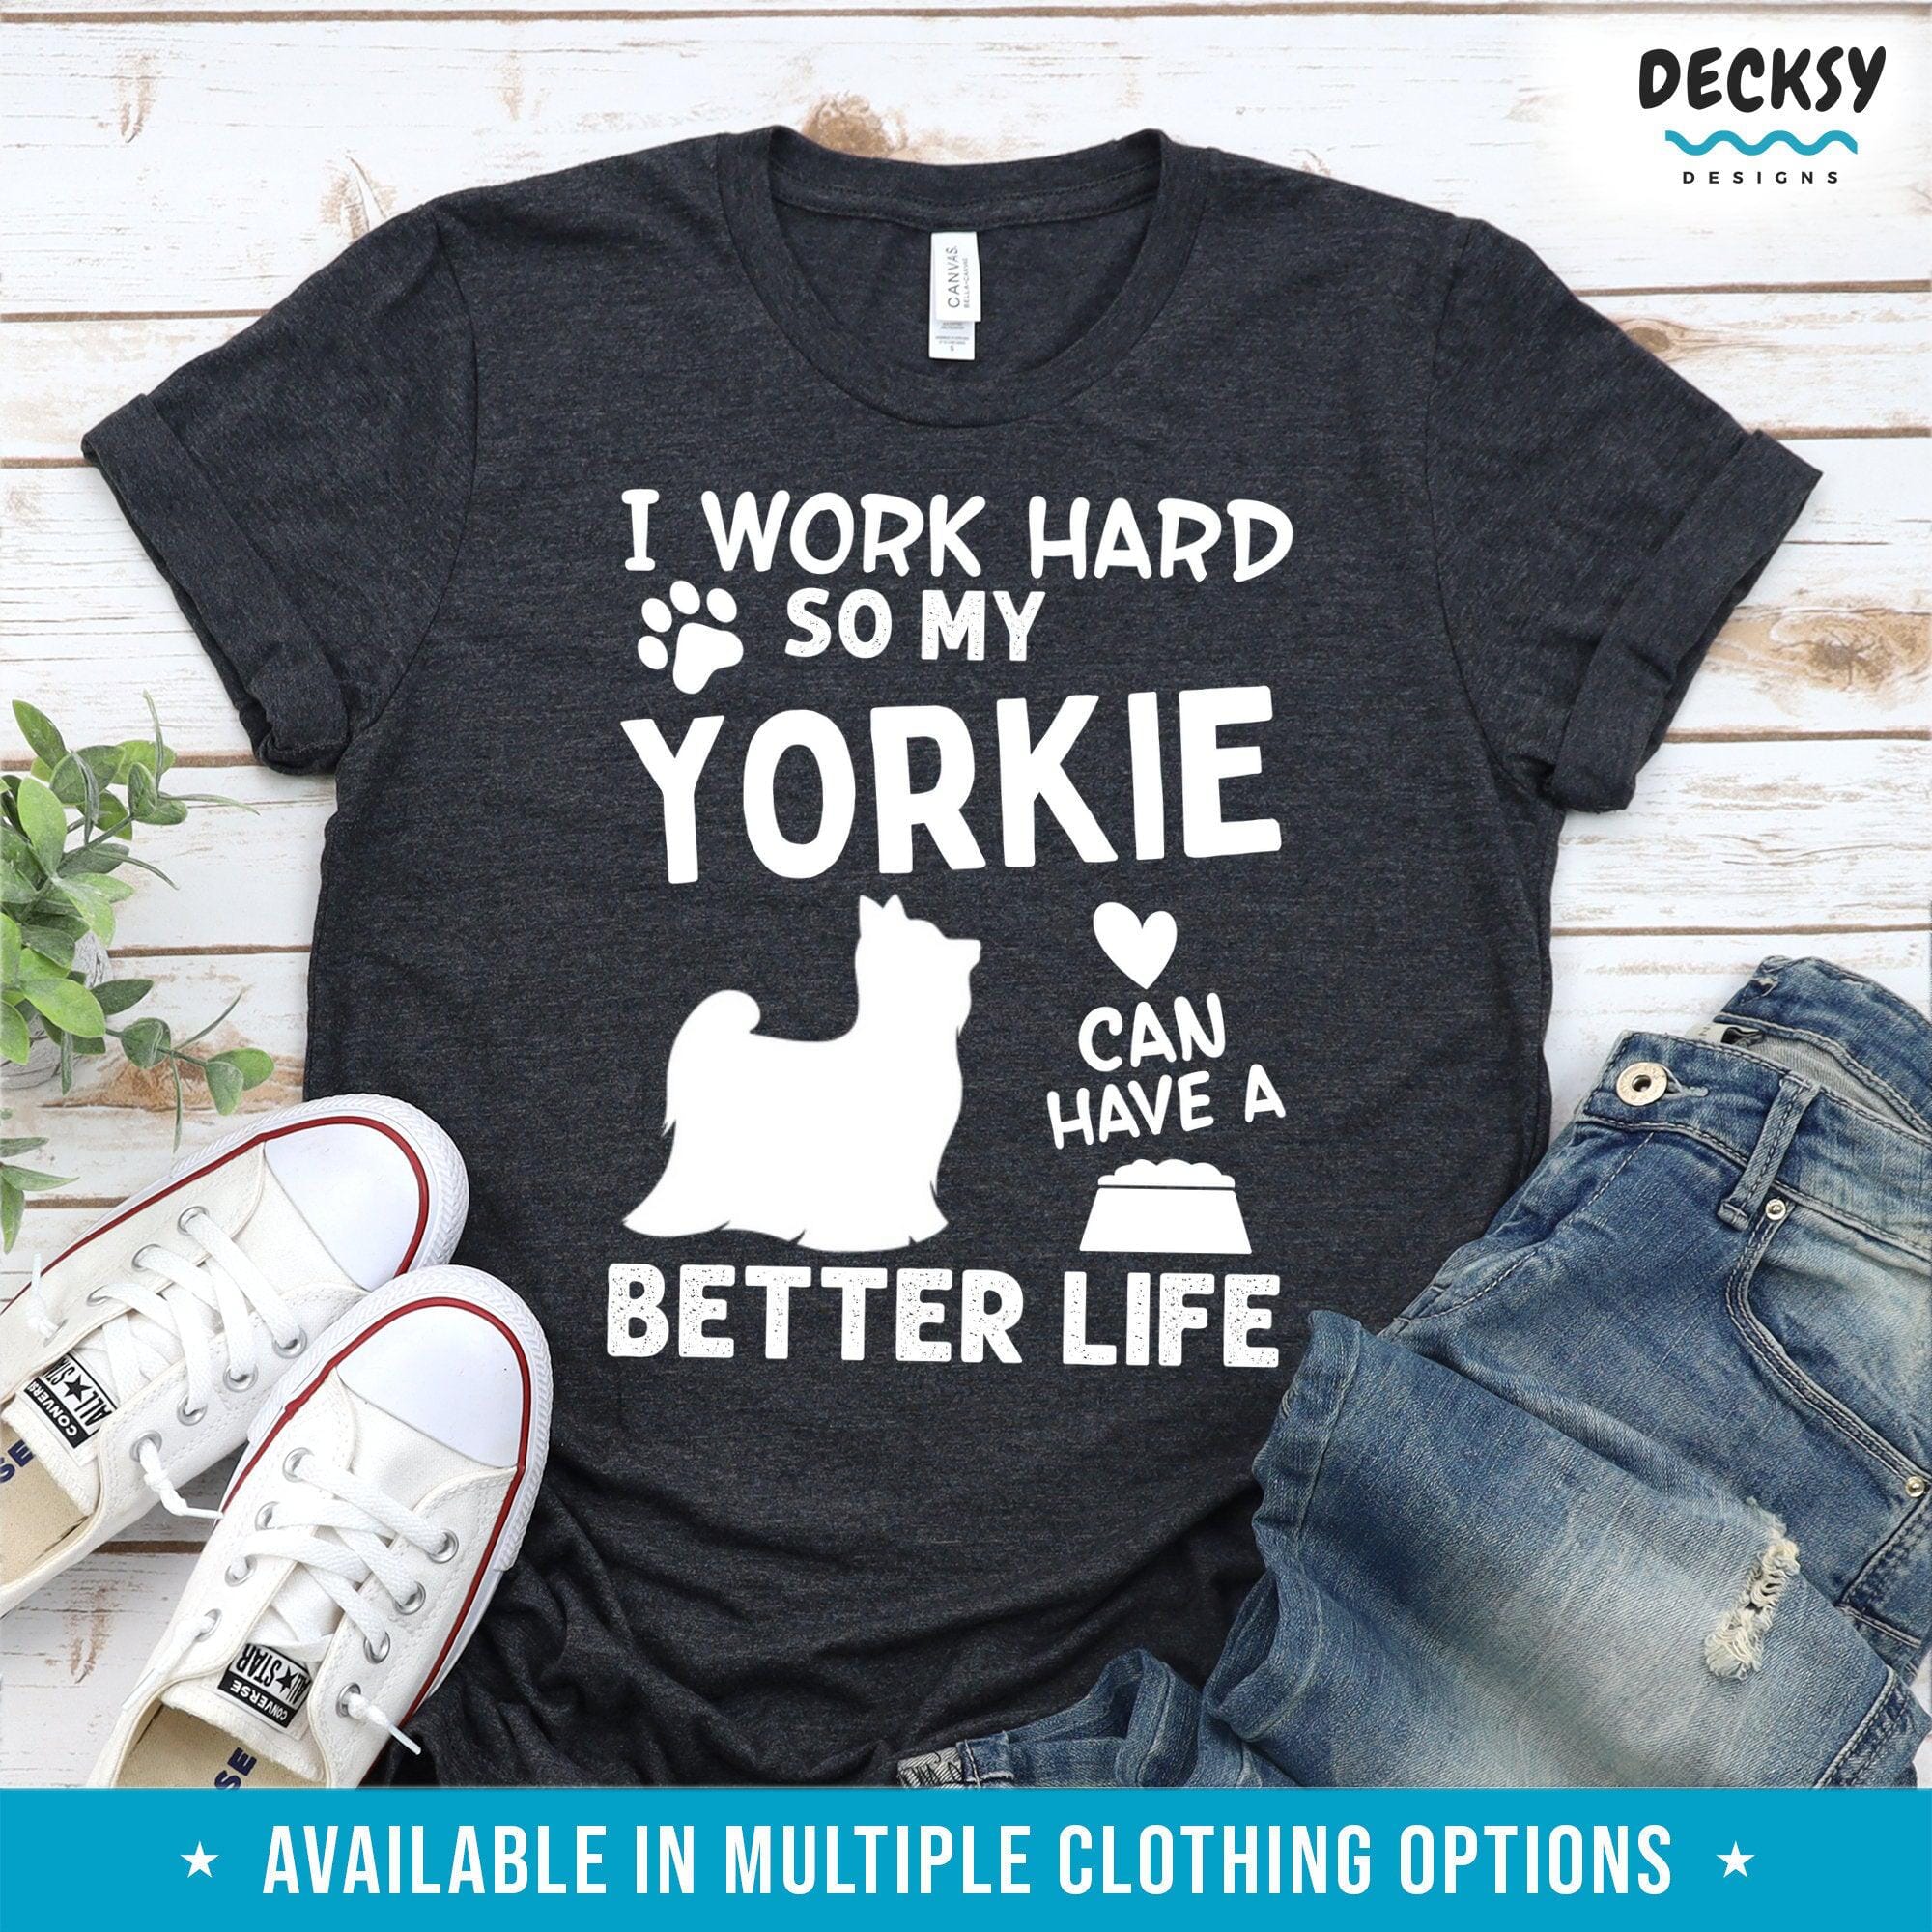 Yorkie Dog Lover Shirt, Yorkshire Terrier Gift-Clothing:Gender-Neutral Adult Clothing:Tops & Tees:T-shirts:Graphic Tees-DecksyDesigns